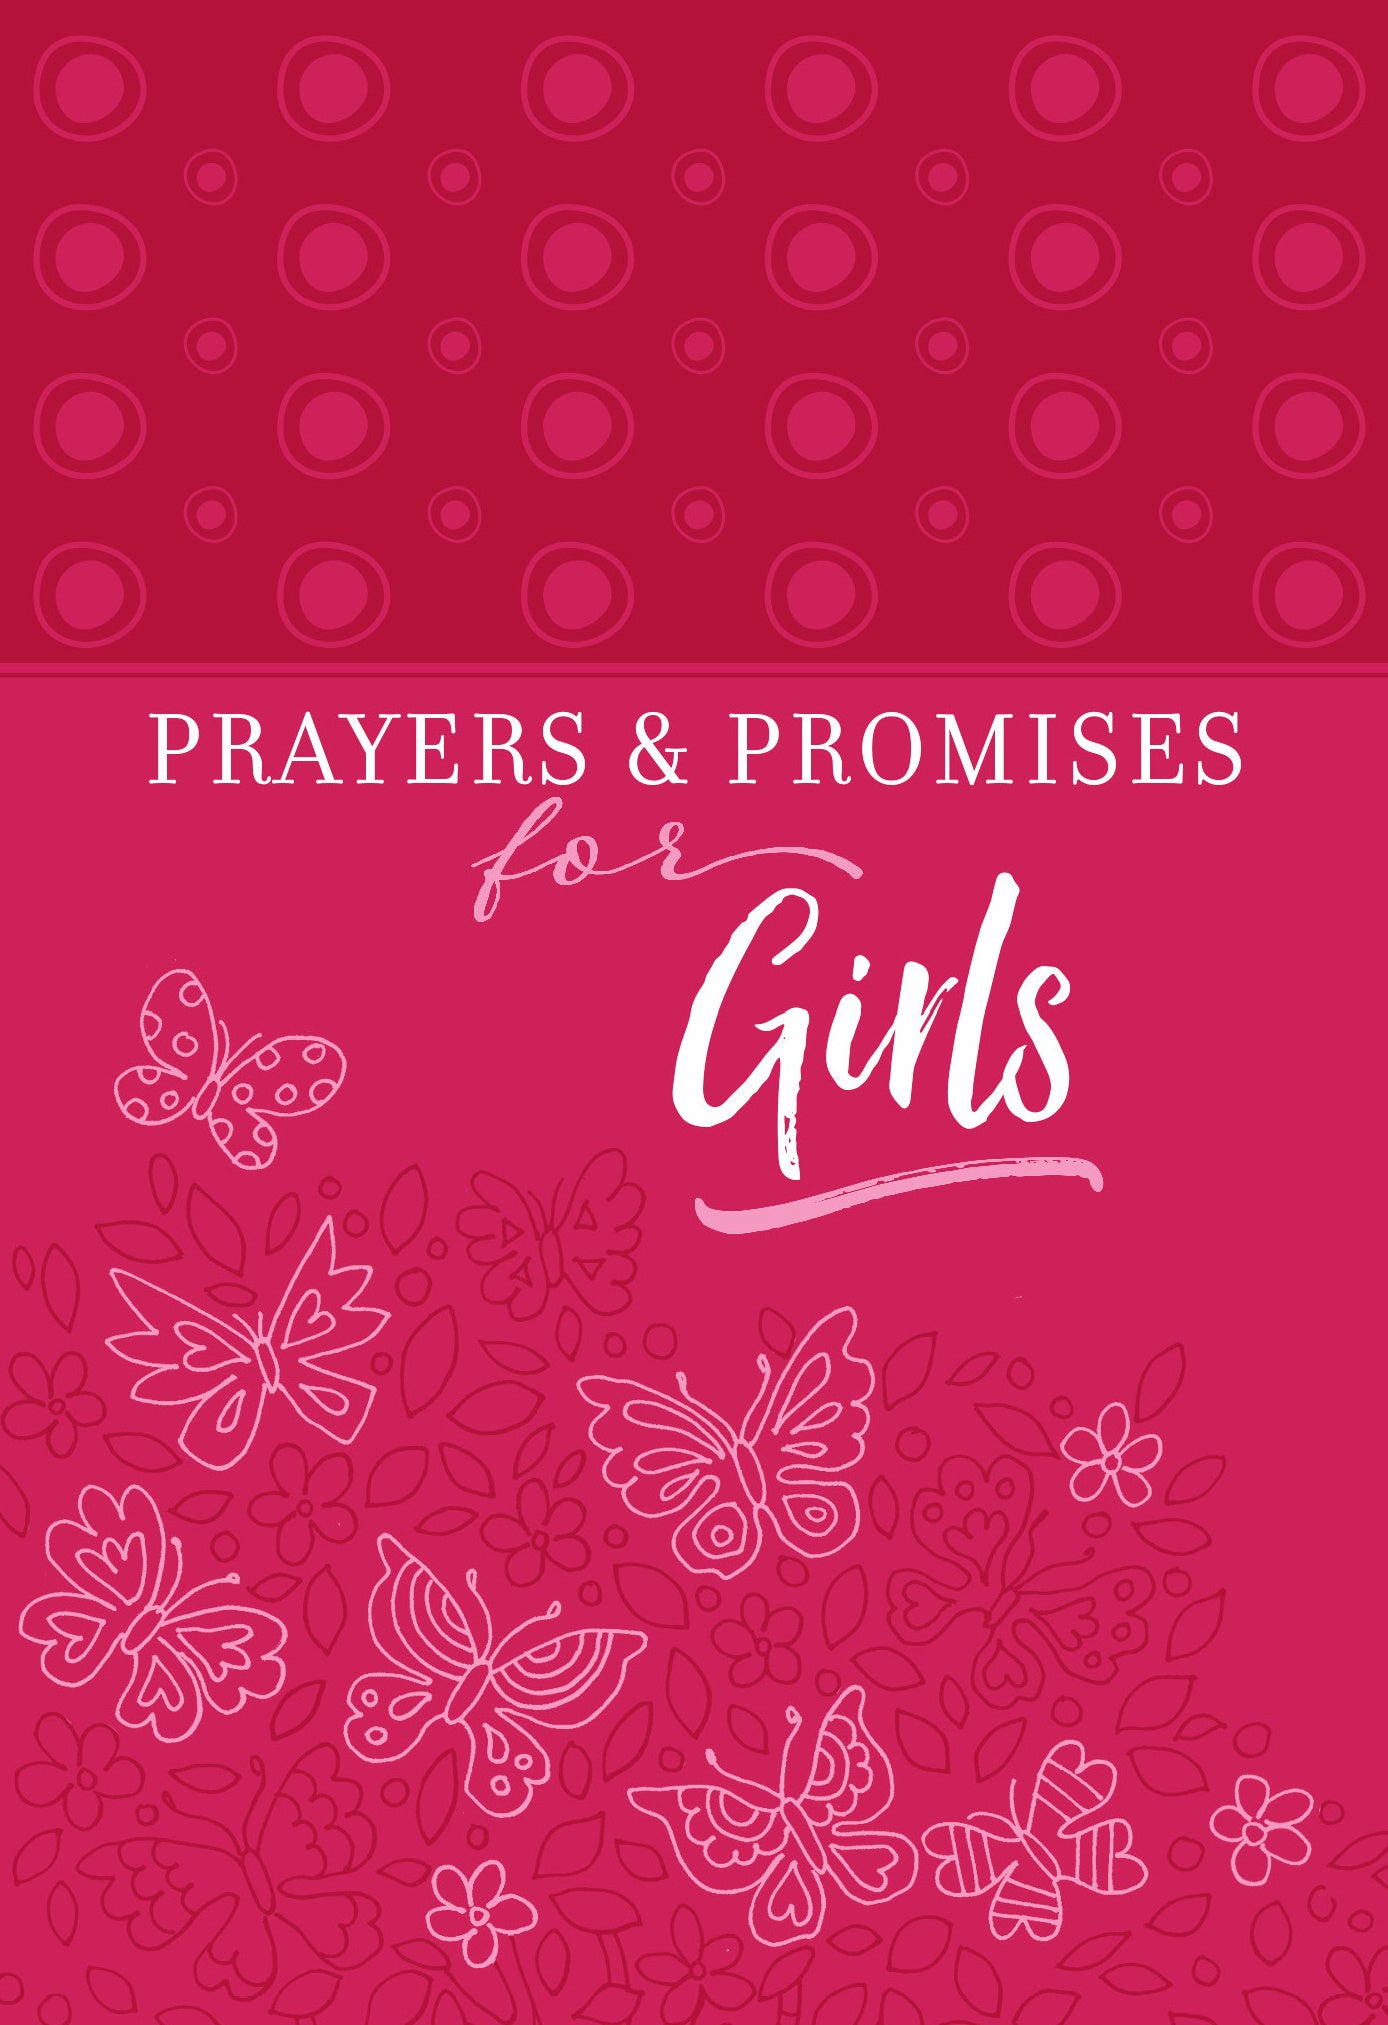 Image of Prayers & Promises for Girls other